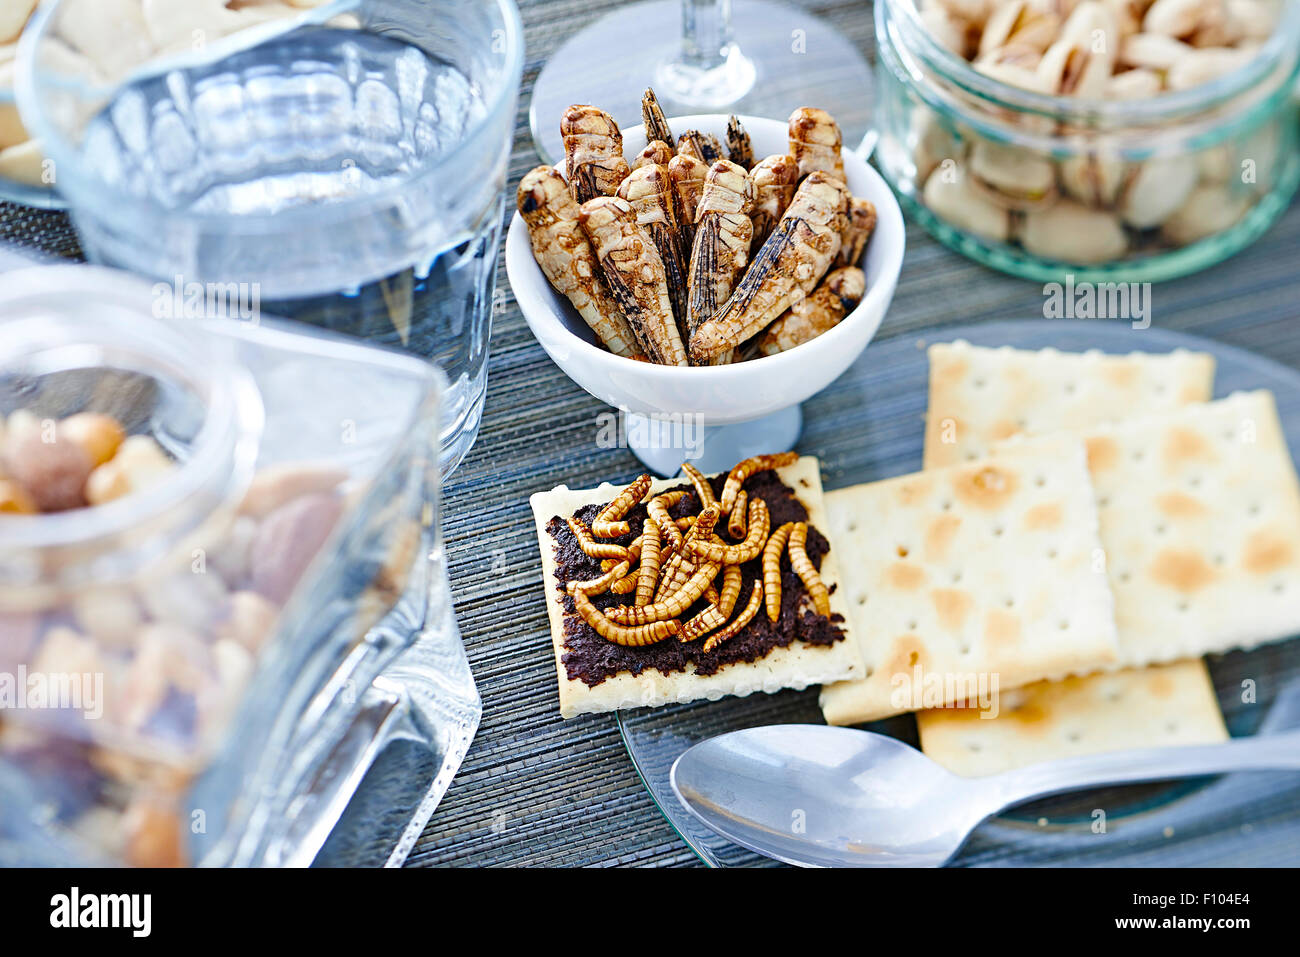 INSECT FOOD Stock Photo